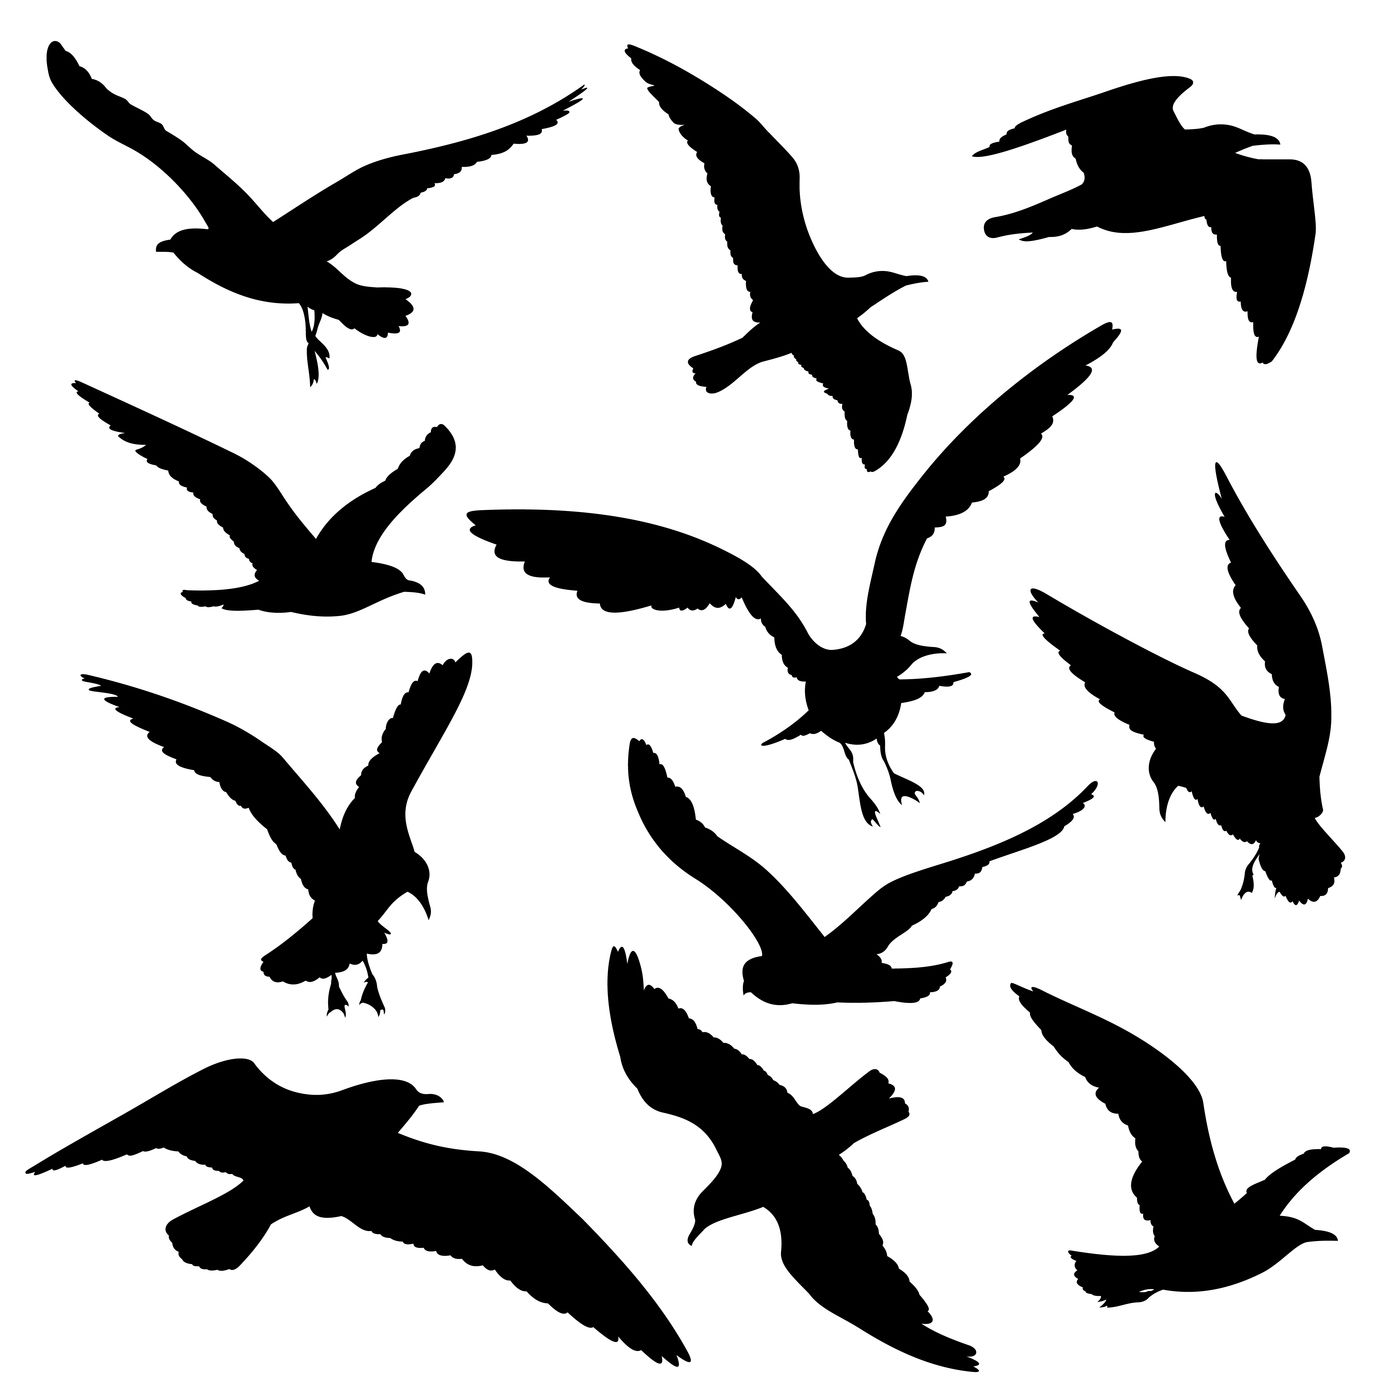 Flying Birds Black Silhouettes Vector Set By Microvector